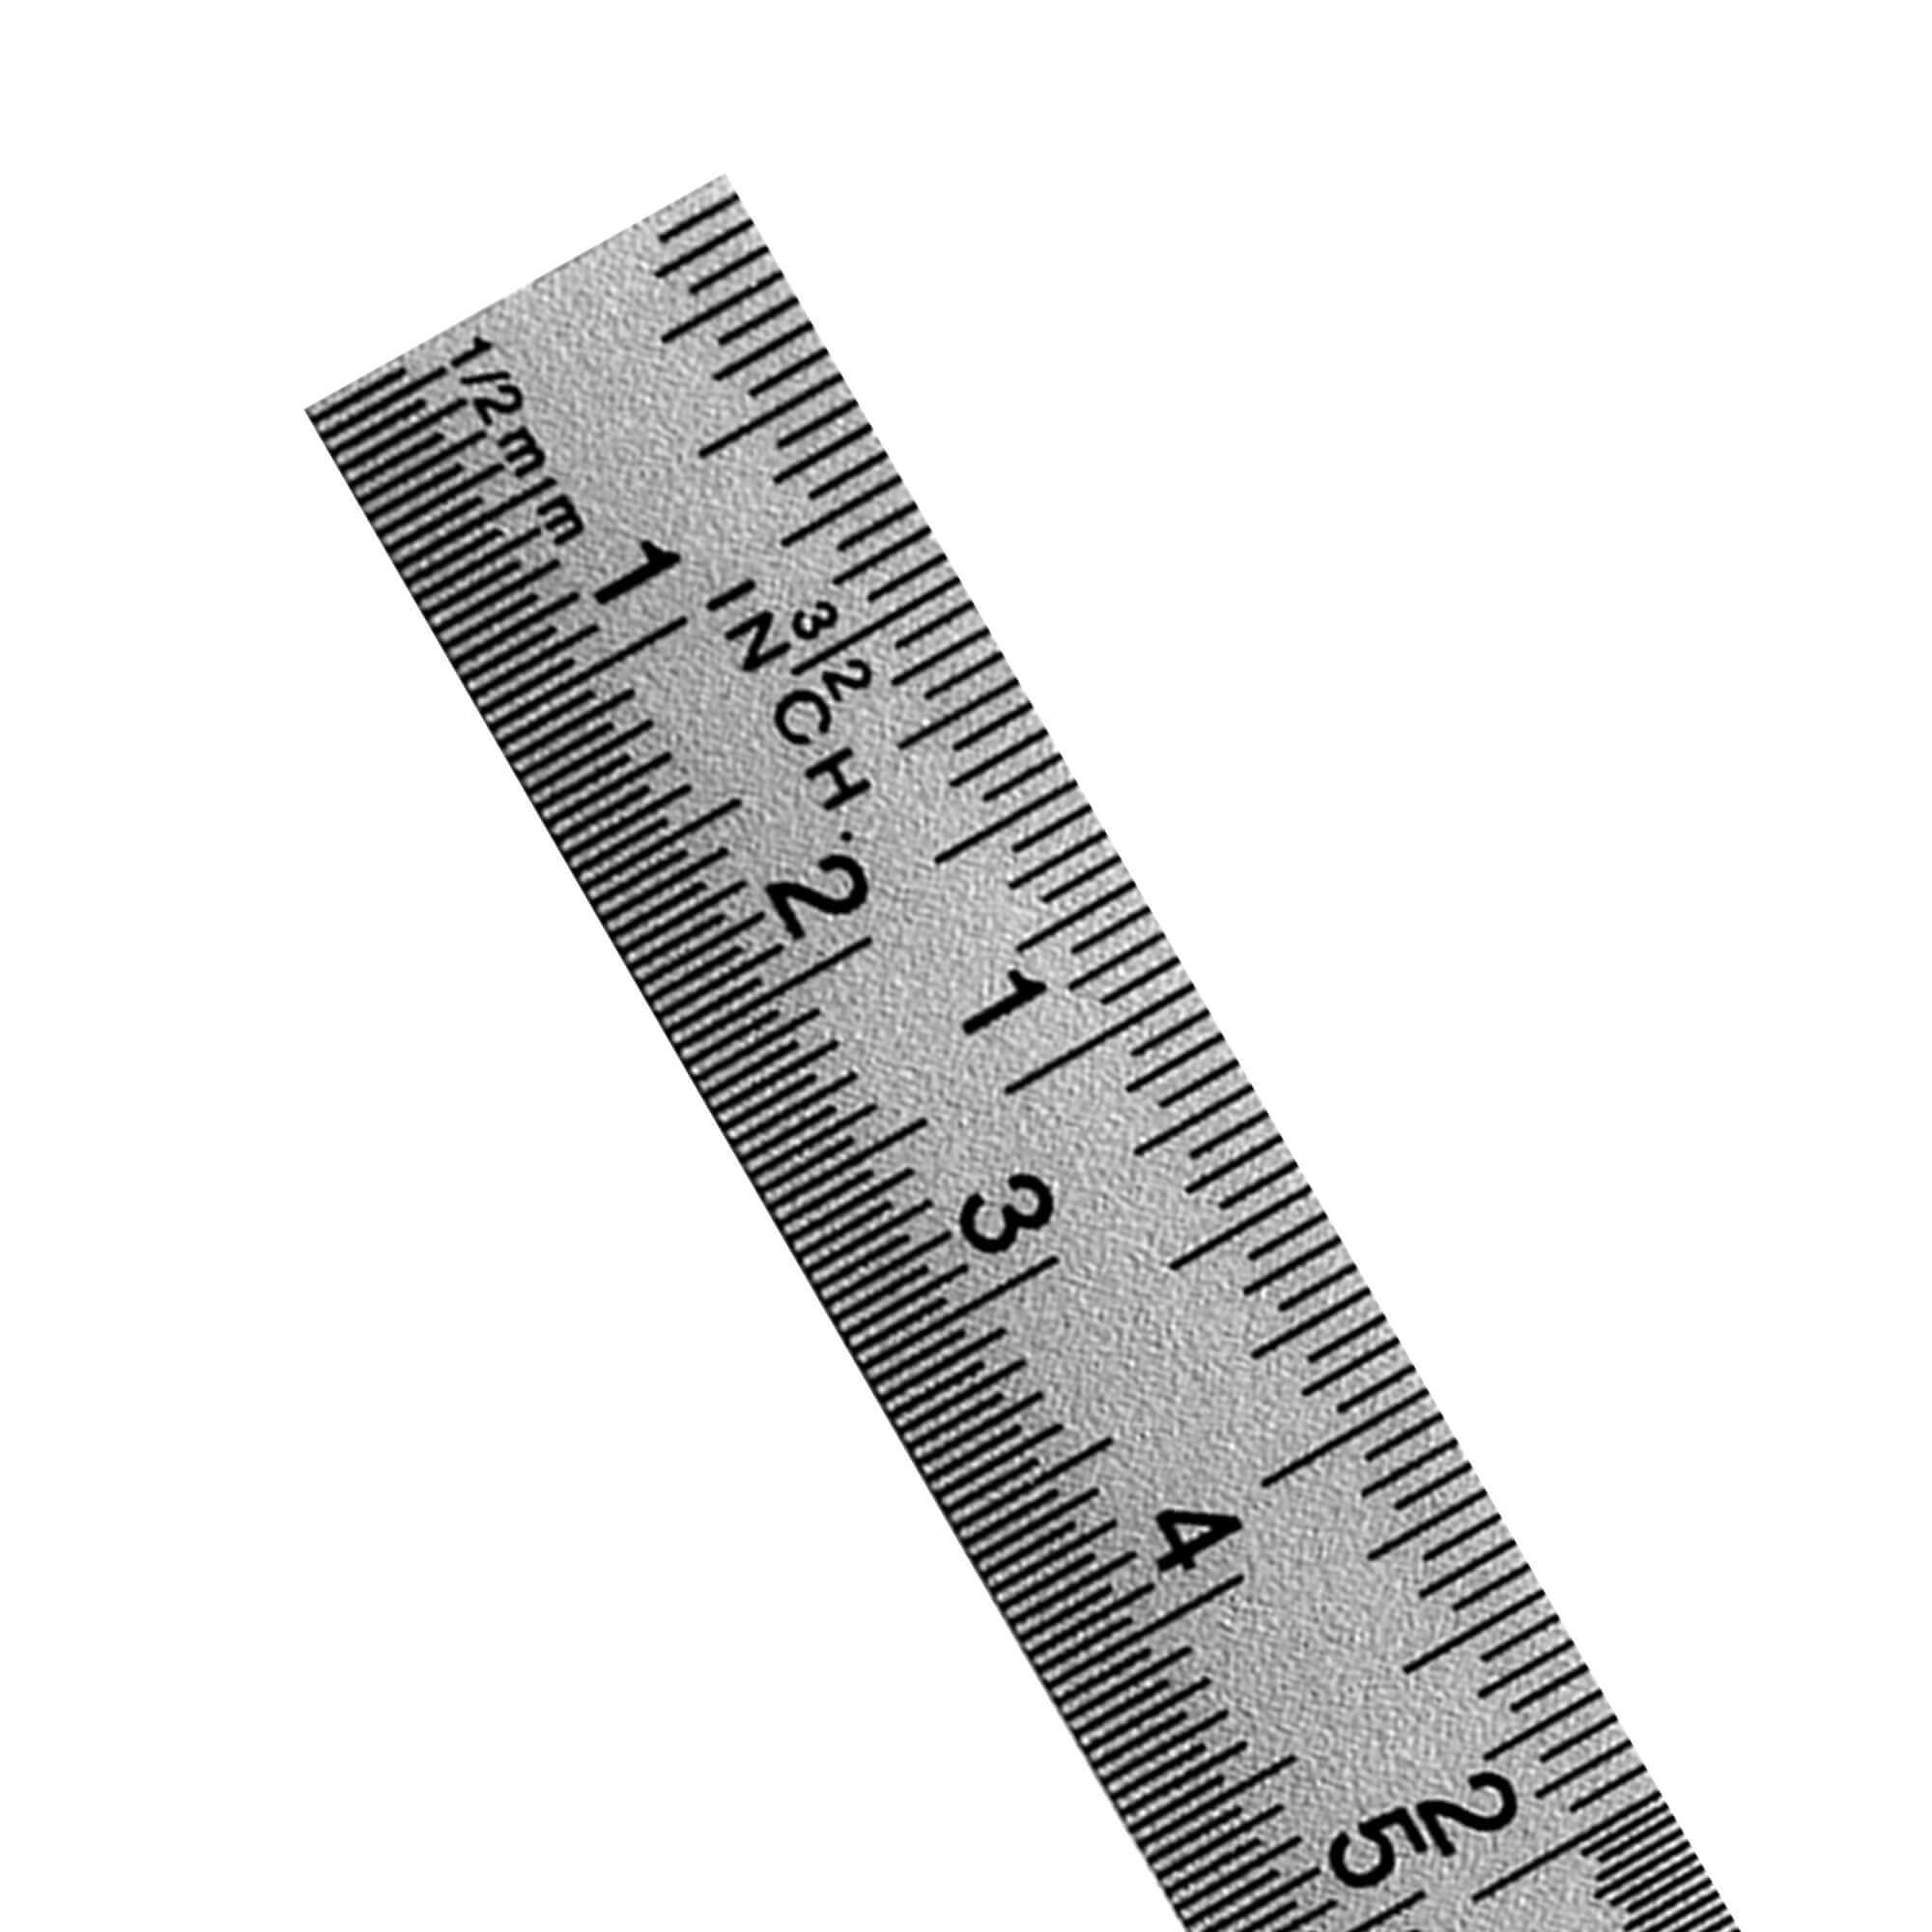 Stainless Steel Ruler - 6 inch